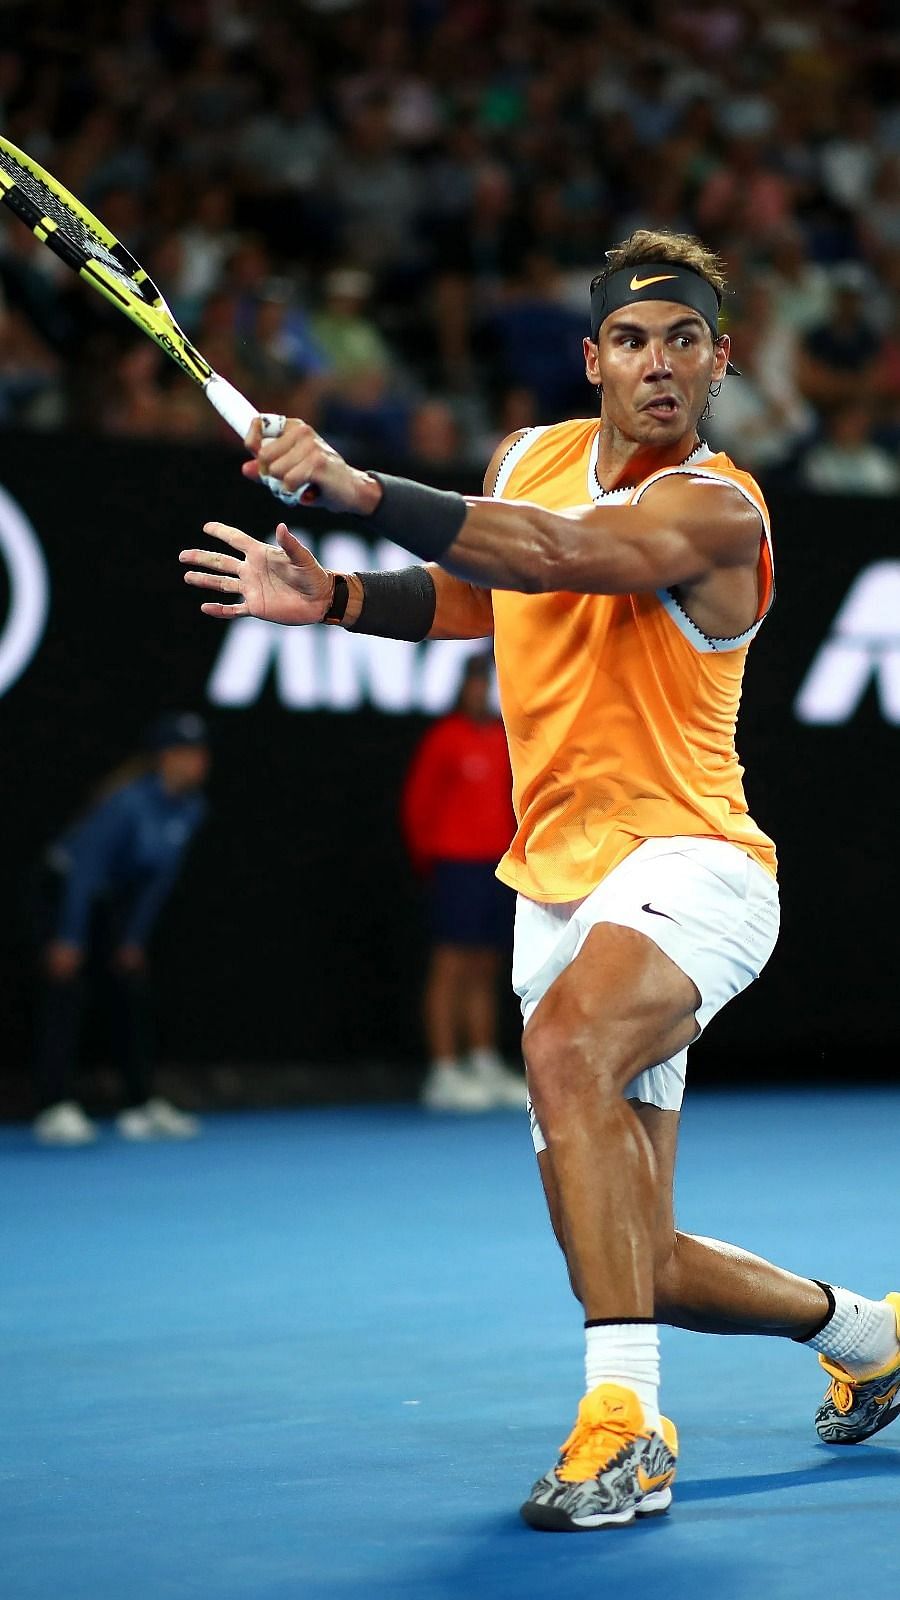 Will Bet On Rafael Nadal To Win Australian Open If He Doesn T Have To Play Novak Djokovic In The Final Paul Annacone